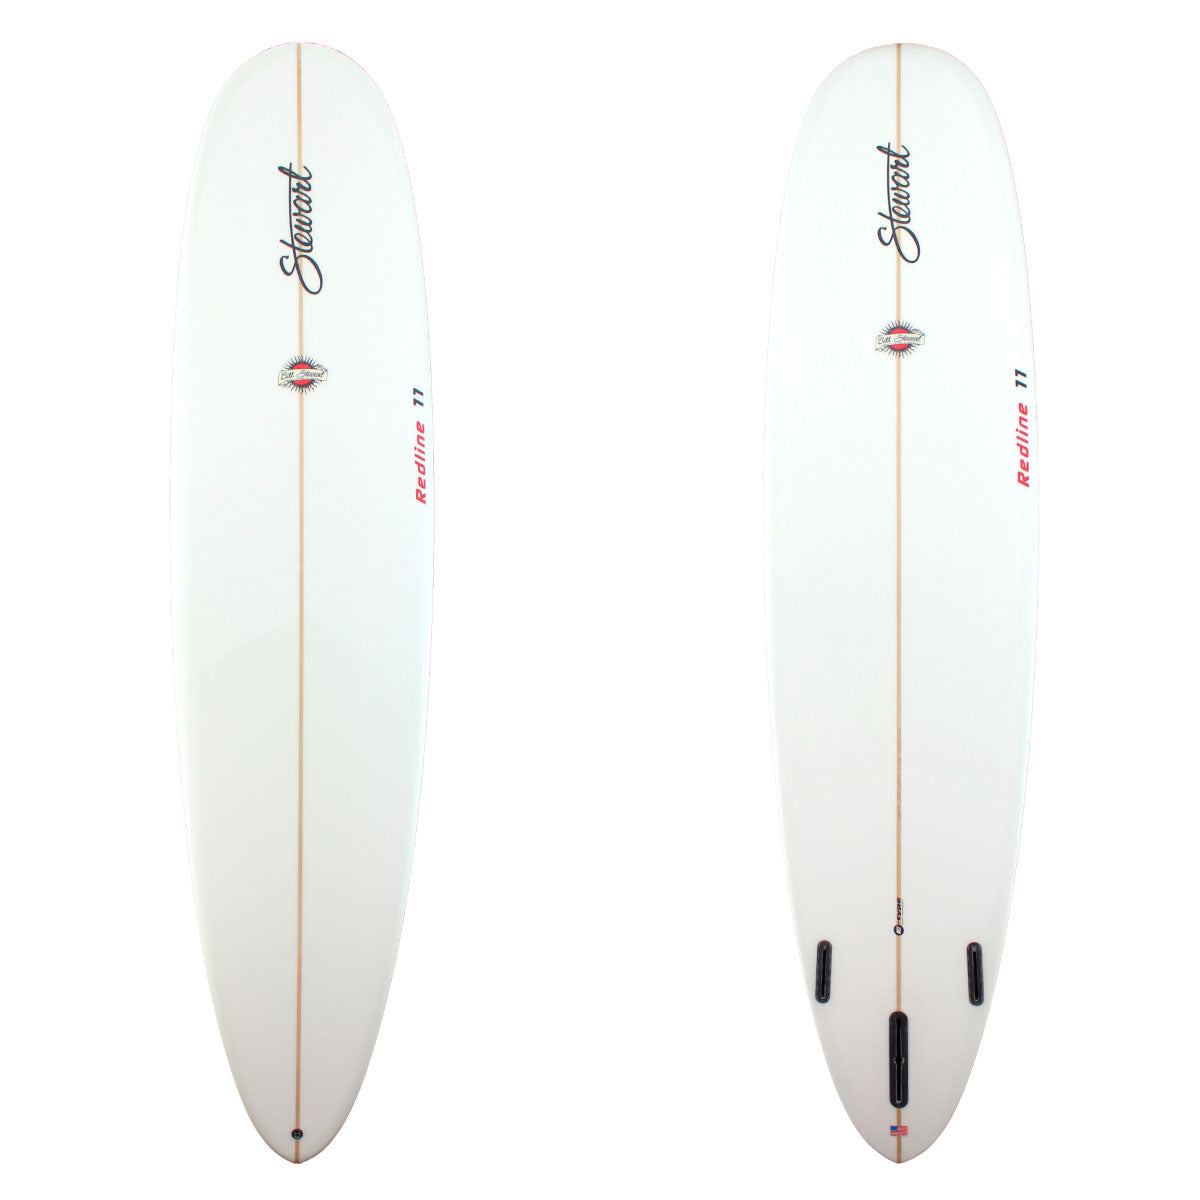 Stewart Surfboards Redline 11 longboard (9'0", 23 3/4", 3 1/2") with clear white deck and bottom